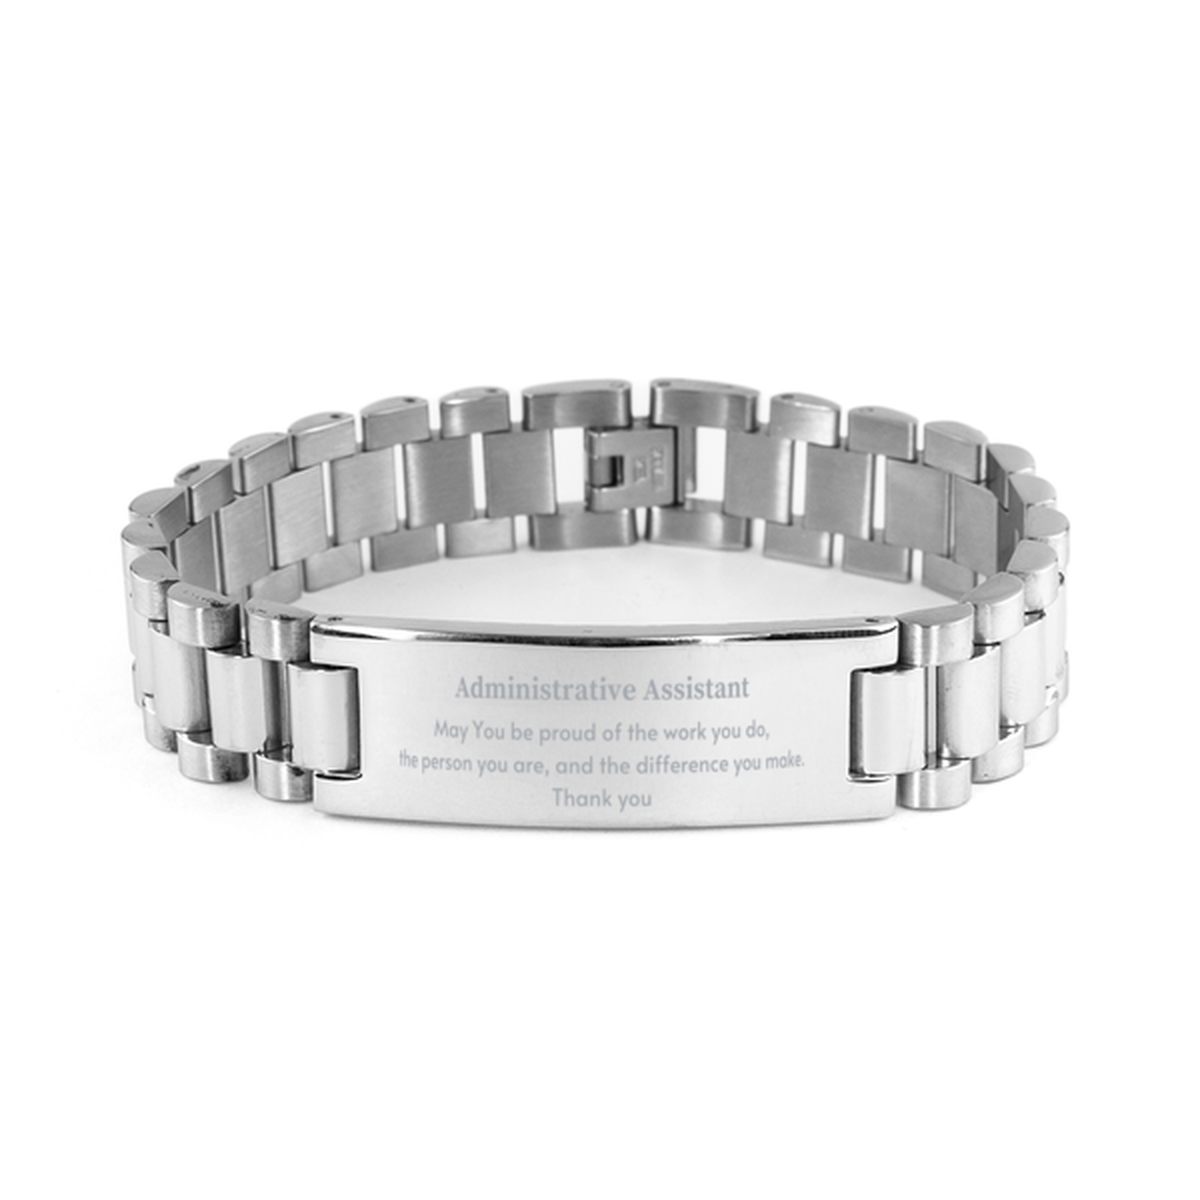 Heartwarming Ladder Stainless Steel Bracelet Retirement Coworkers Gifts for Administrative Assistant, Administrative Assistant May You be proud of the work you do, the person you are Gifts for Boss Men Women Friends